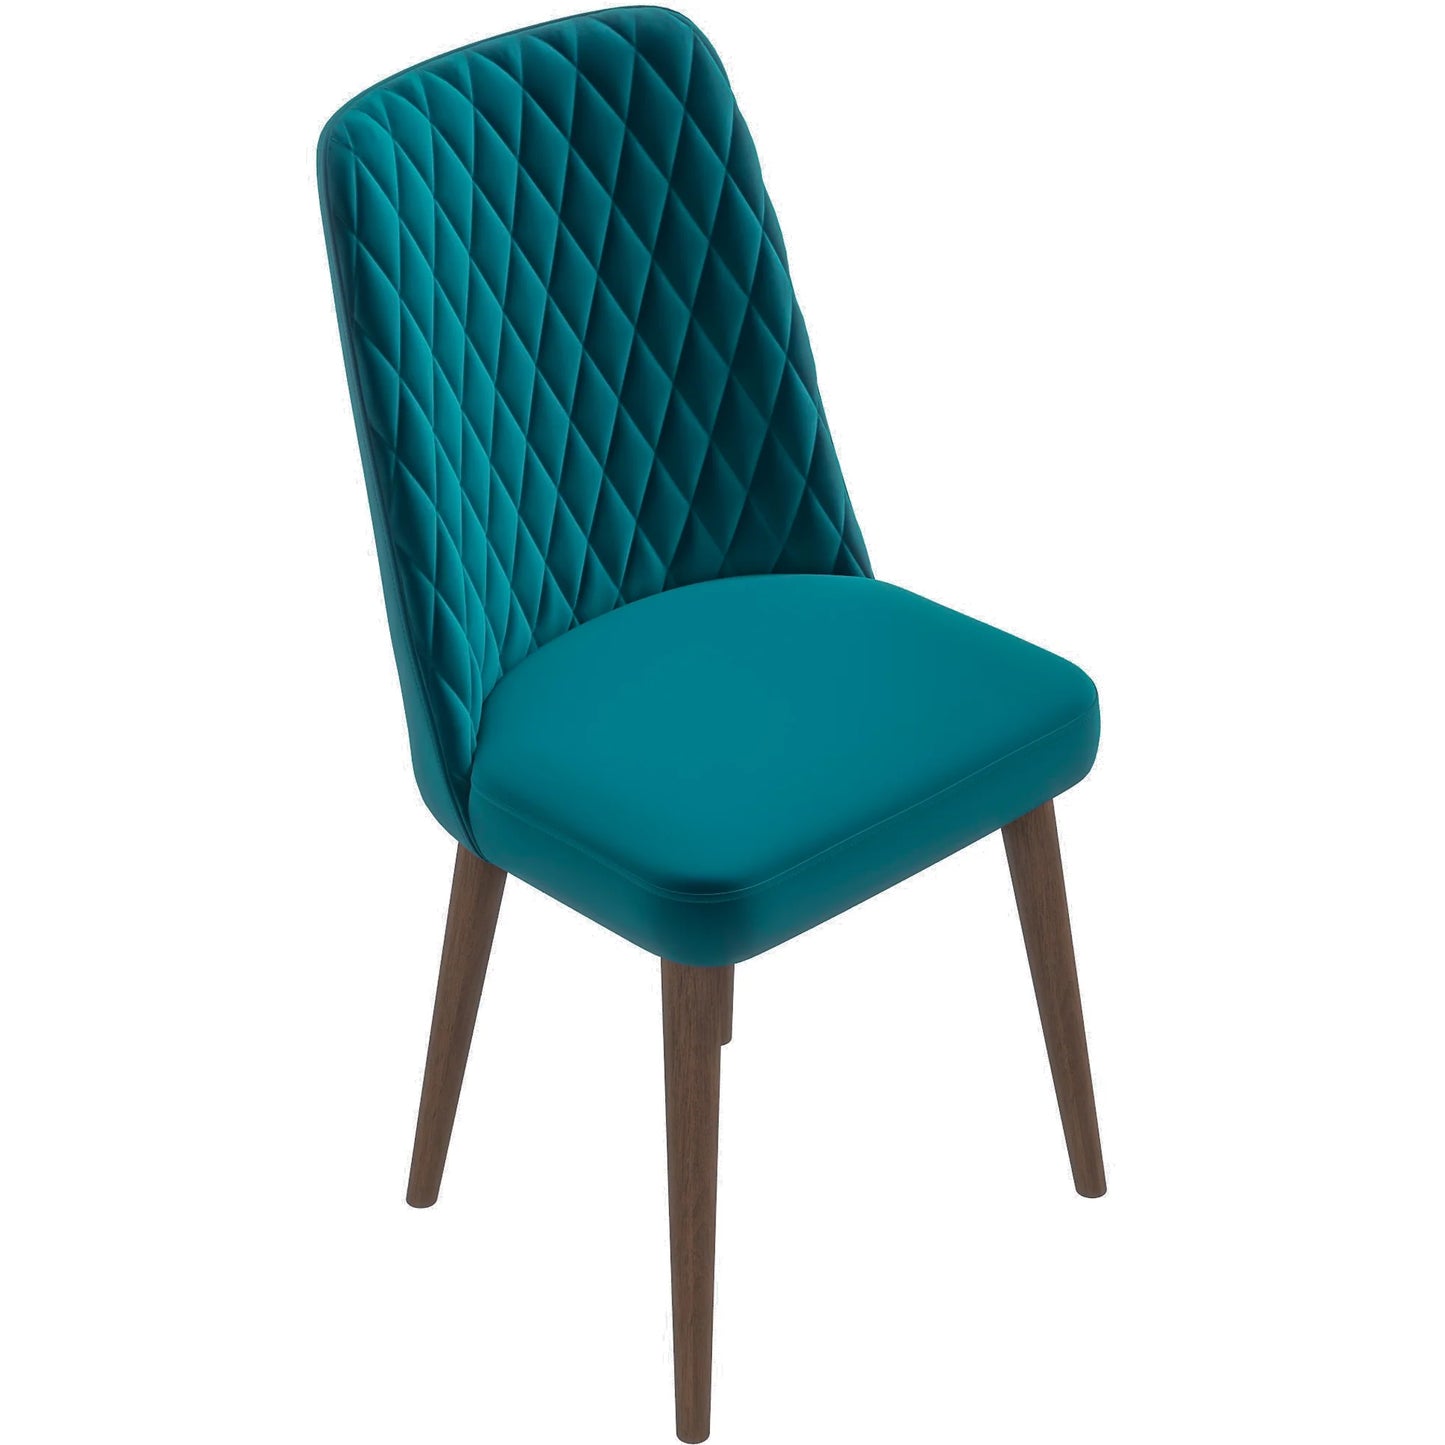 Evette Mid Century Modern Teal Dining Chair